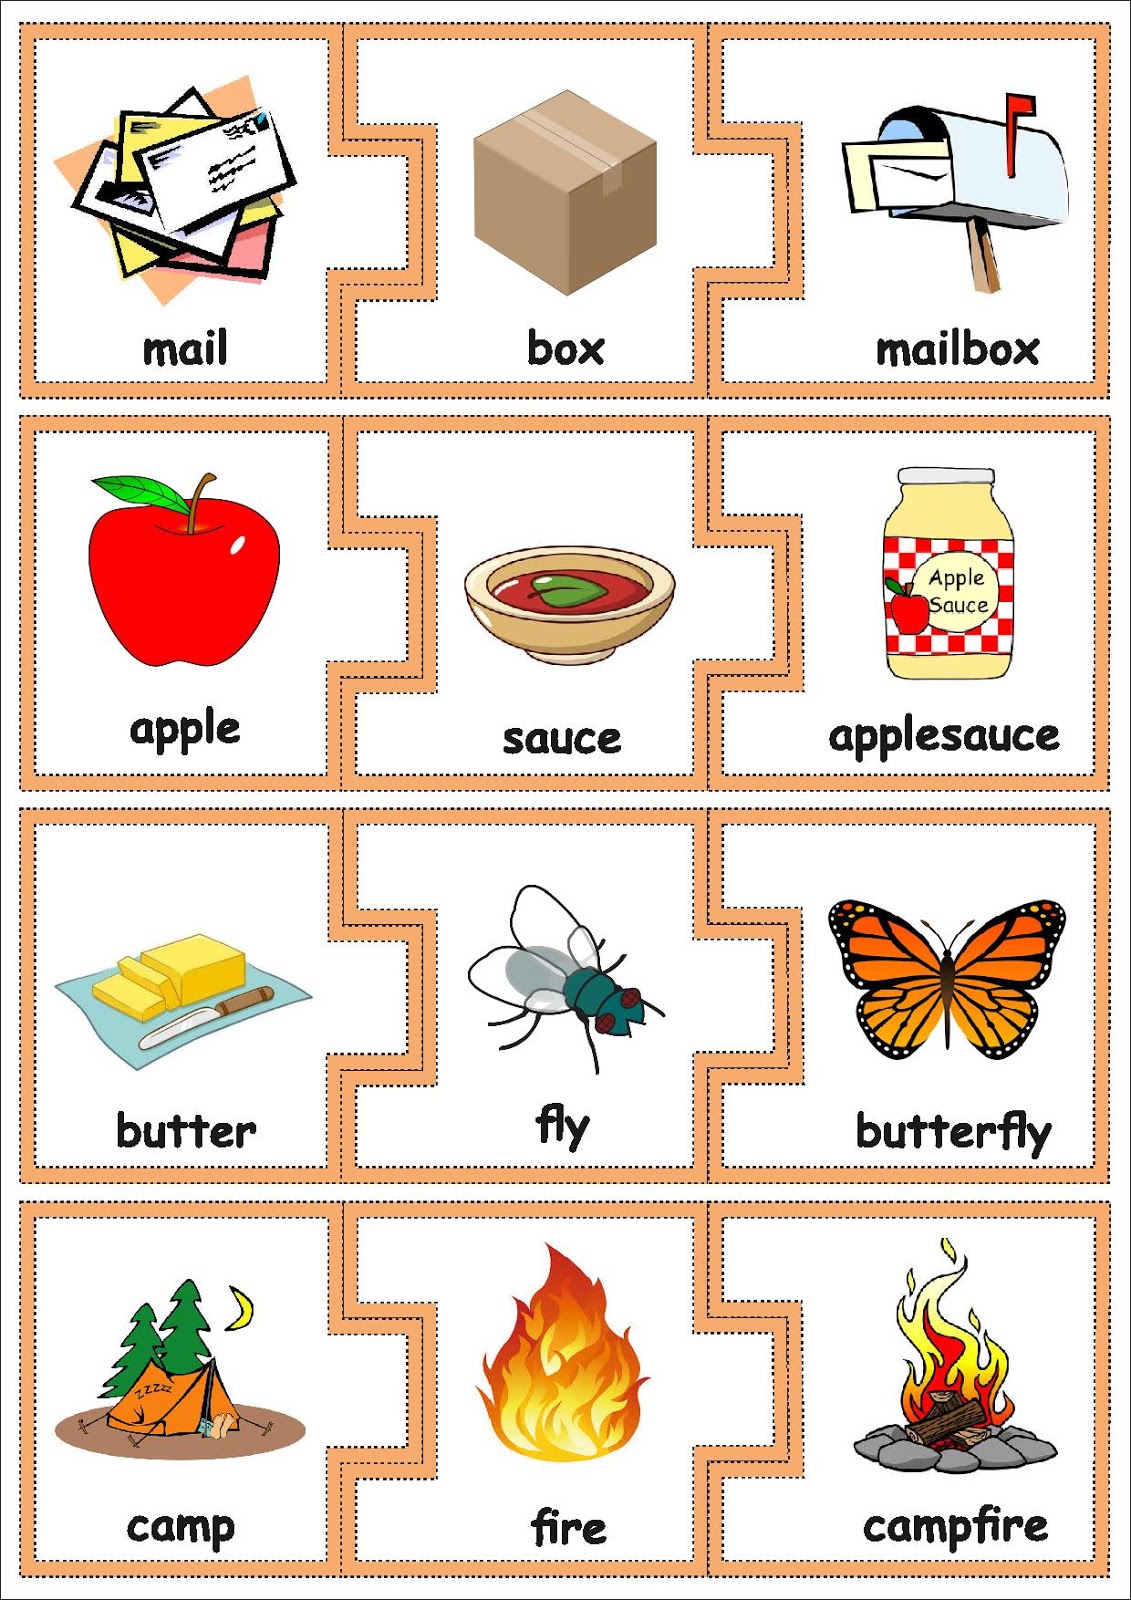 download-compound-word-puzzles-in-pdf